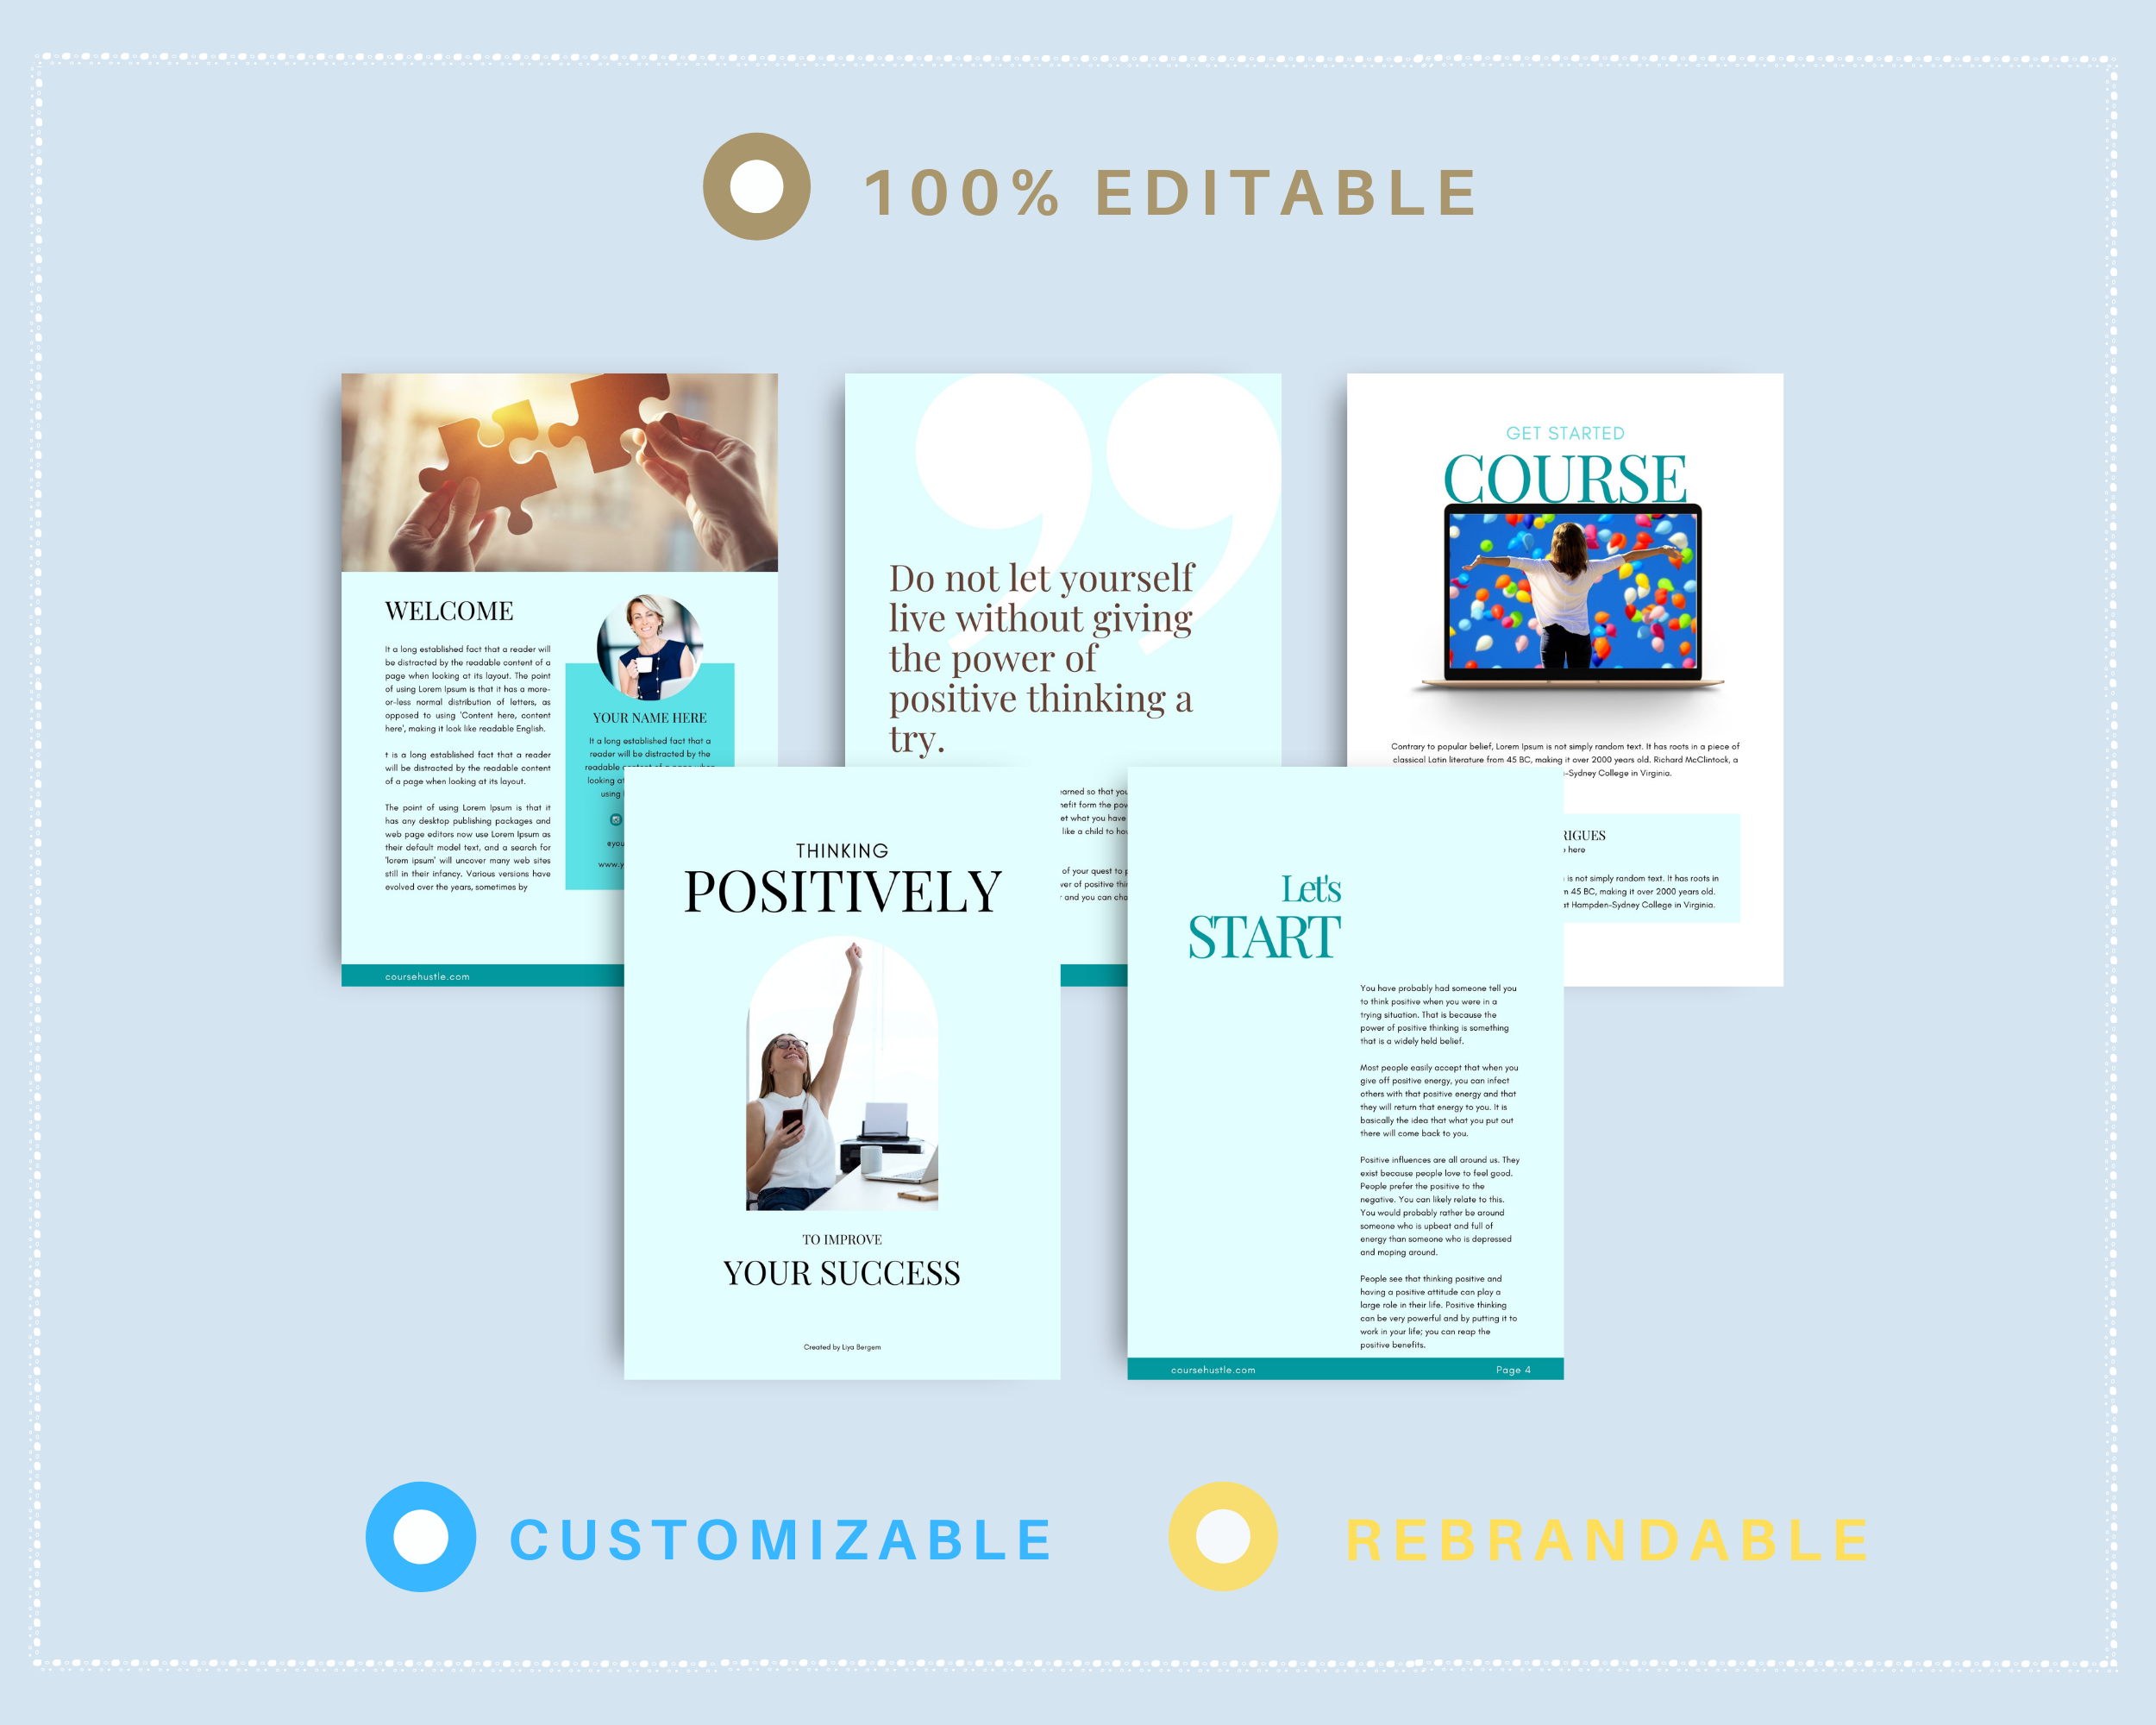 Done-for-You Think Positive to Improve Success Playbook in Canva | Editable A4 Size Canva Template